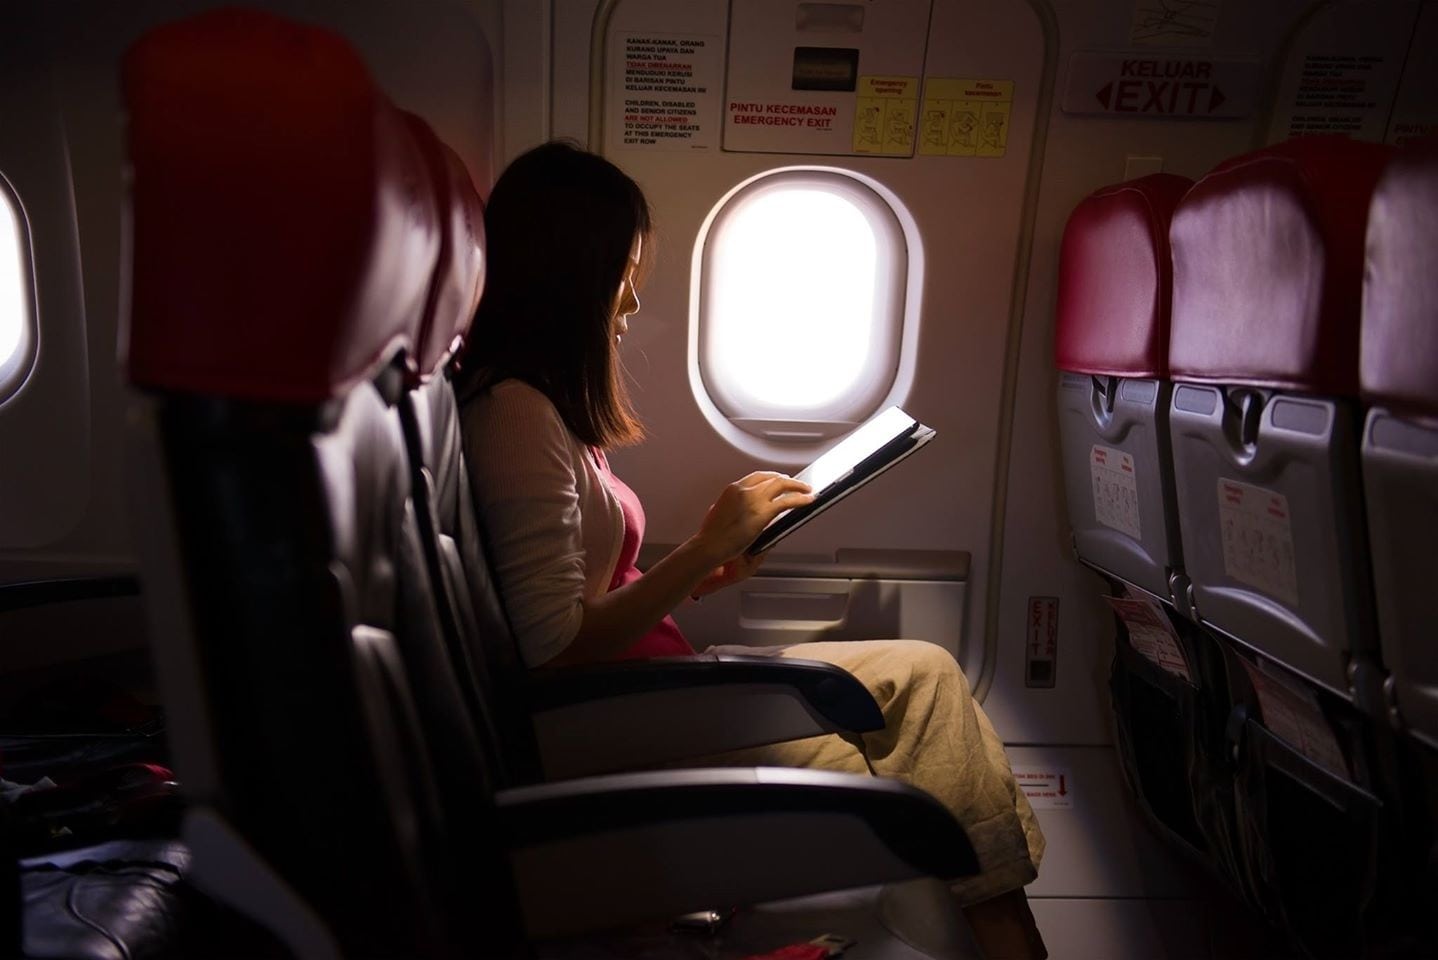 According to Honeywell, "New 4G LTE-based service to meet passengers’ online demand and help make the 'Connected Aircraft' a reality."